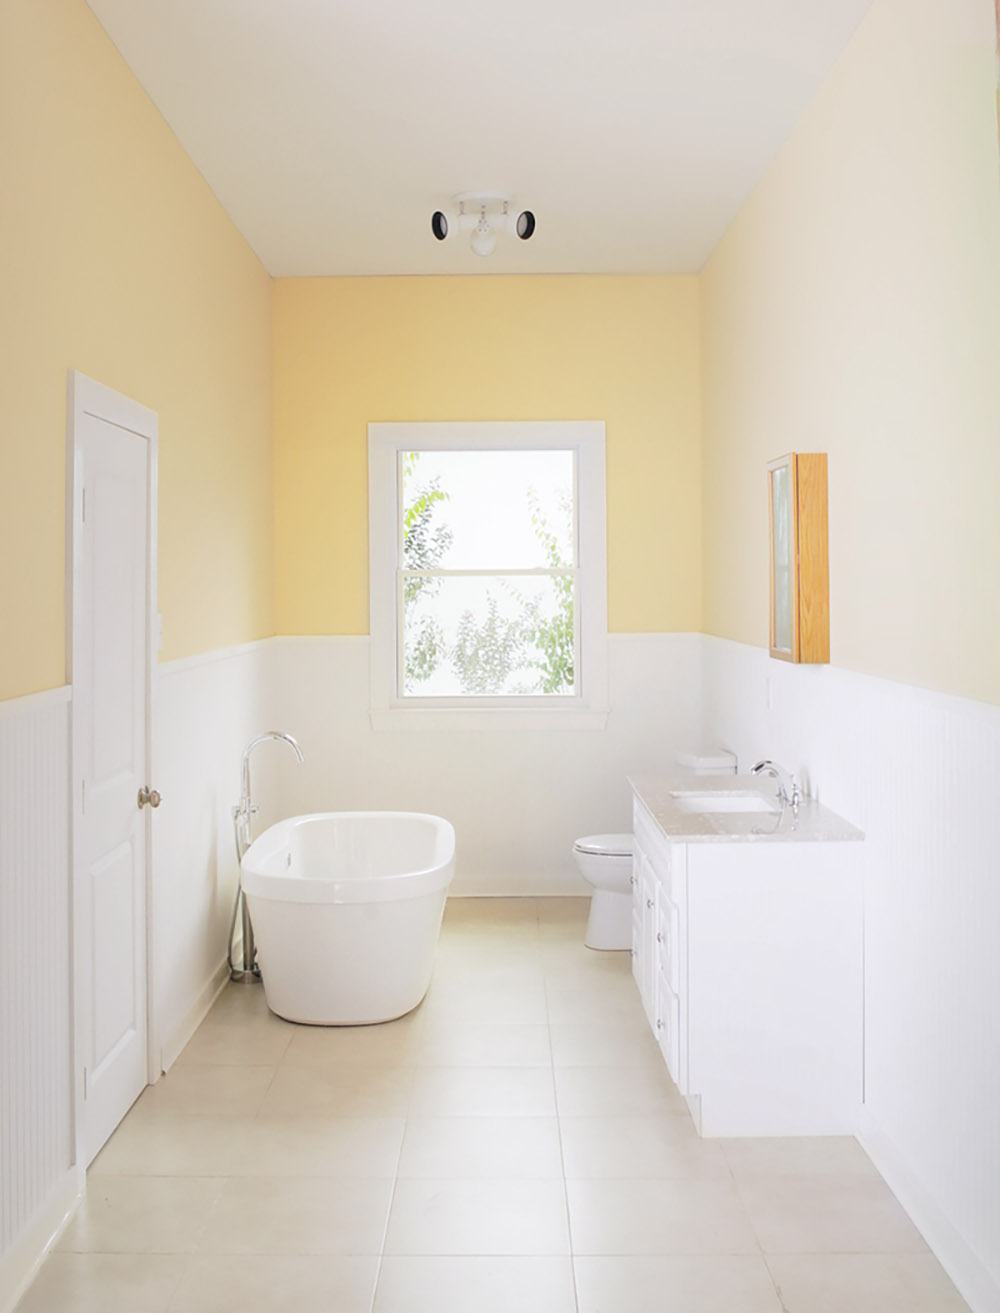 An undecorated white and yellow bathroom.